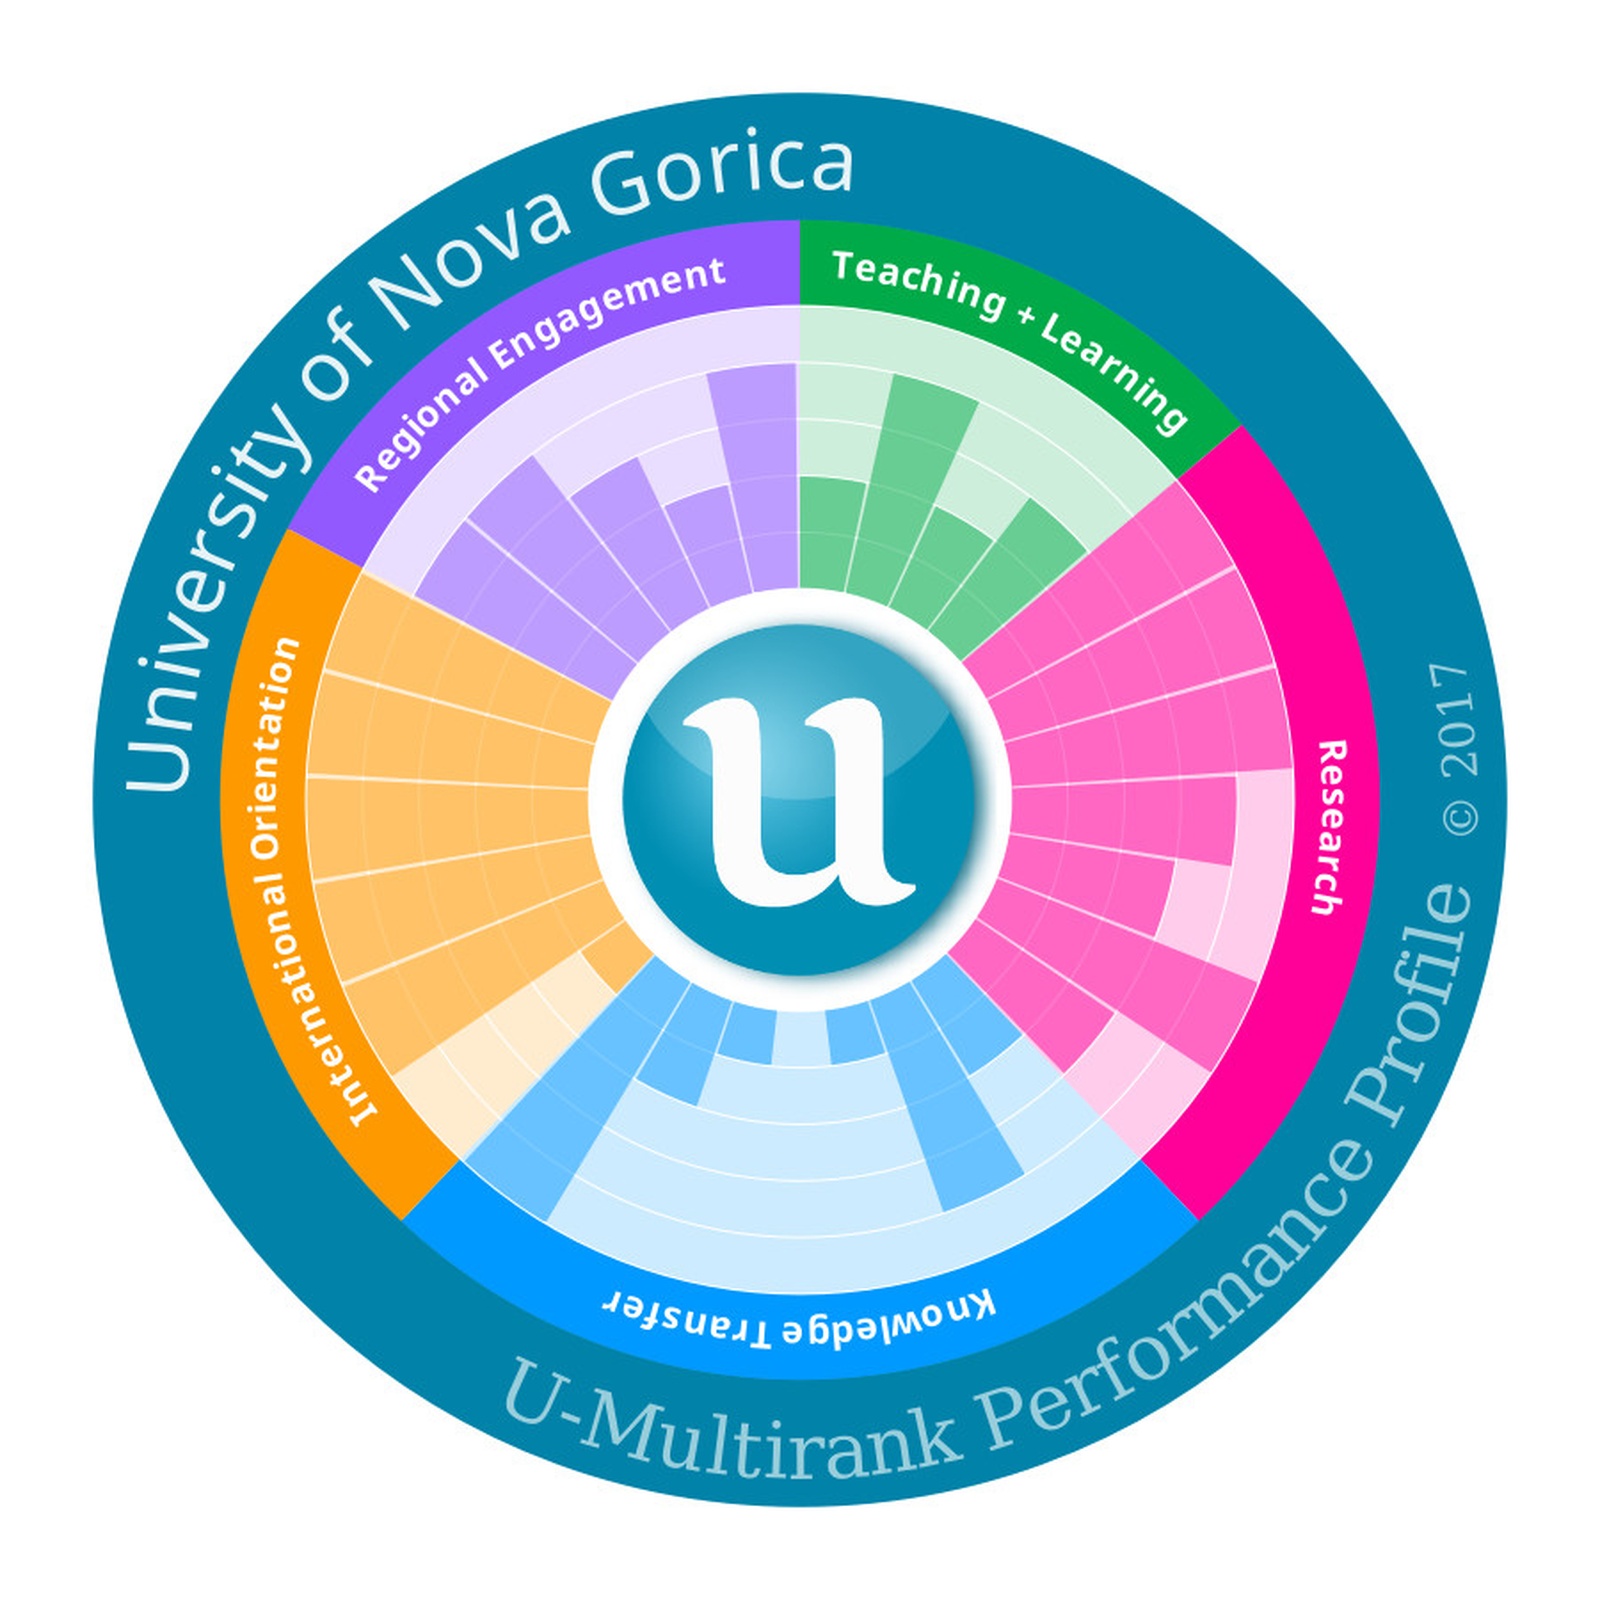 The graphic illustration of UNG’s profile on the U-Multirank 2016 global ranking chart. The height of each column within a specific circular sector denotes a grade achieved for a specific criterion (the tallest column stands for 1 – exceptionally good, and the lowest column stands for 5 –weak).